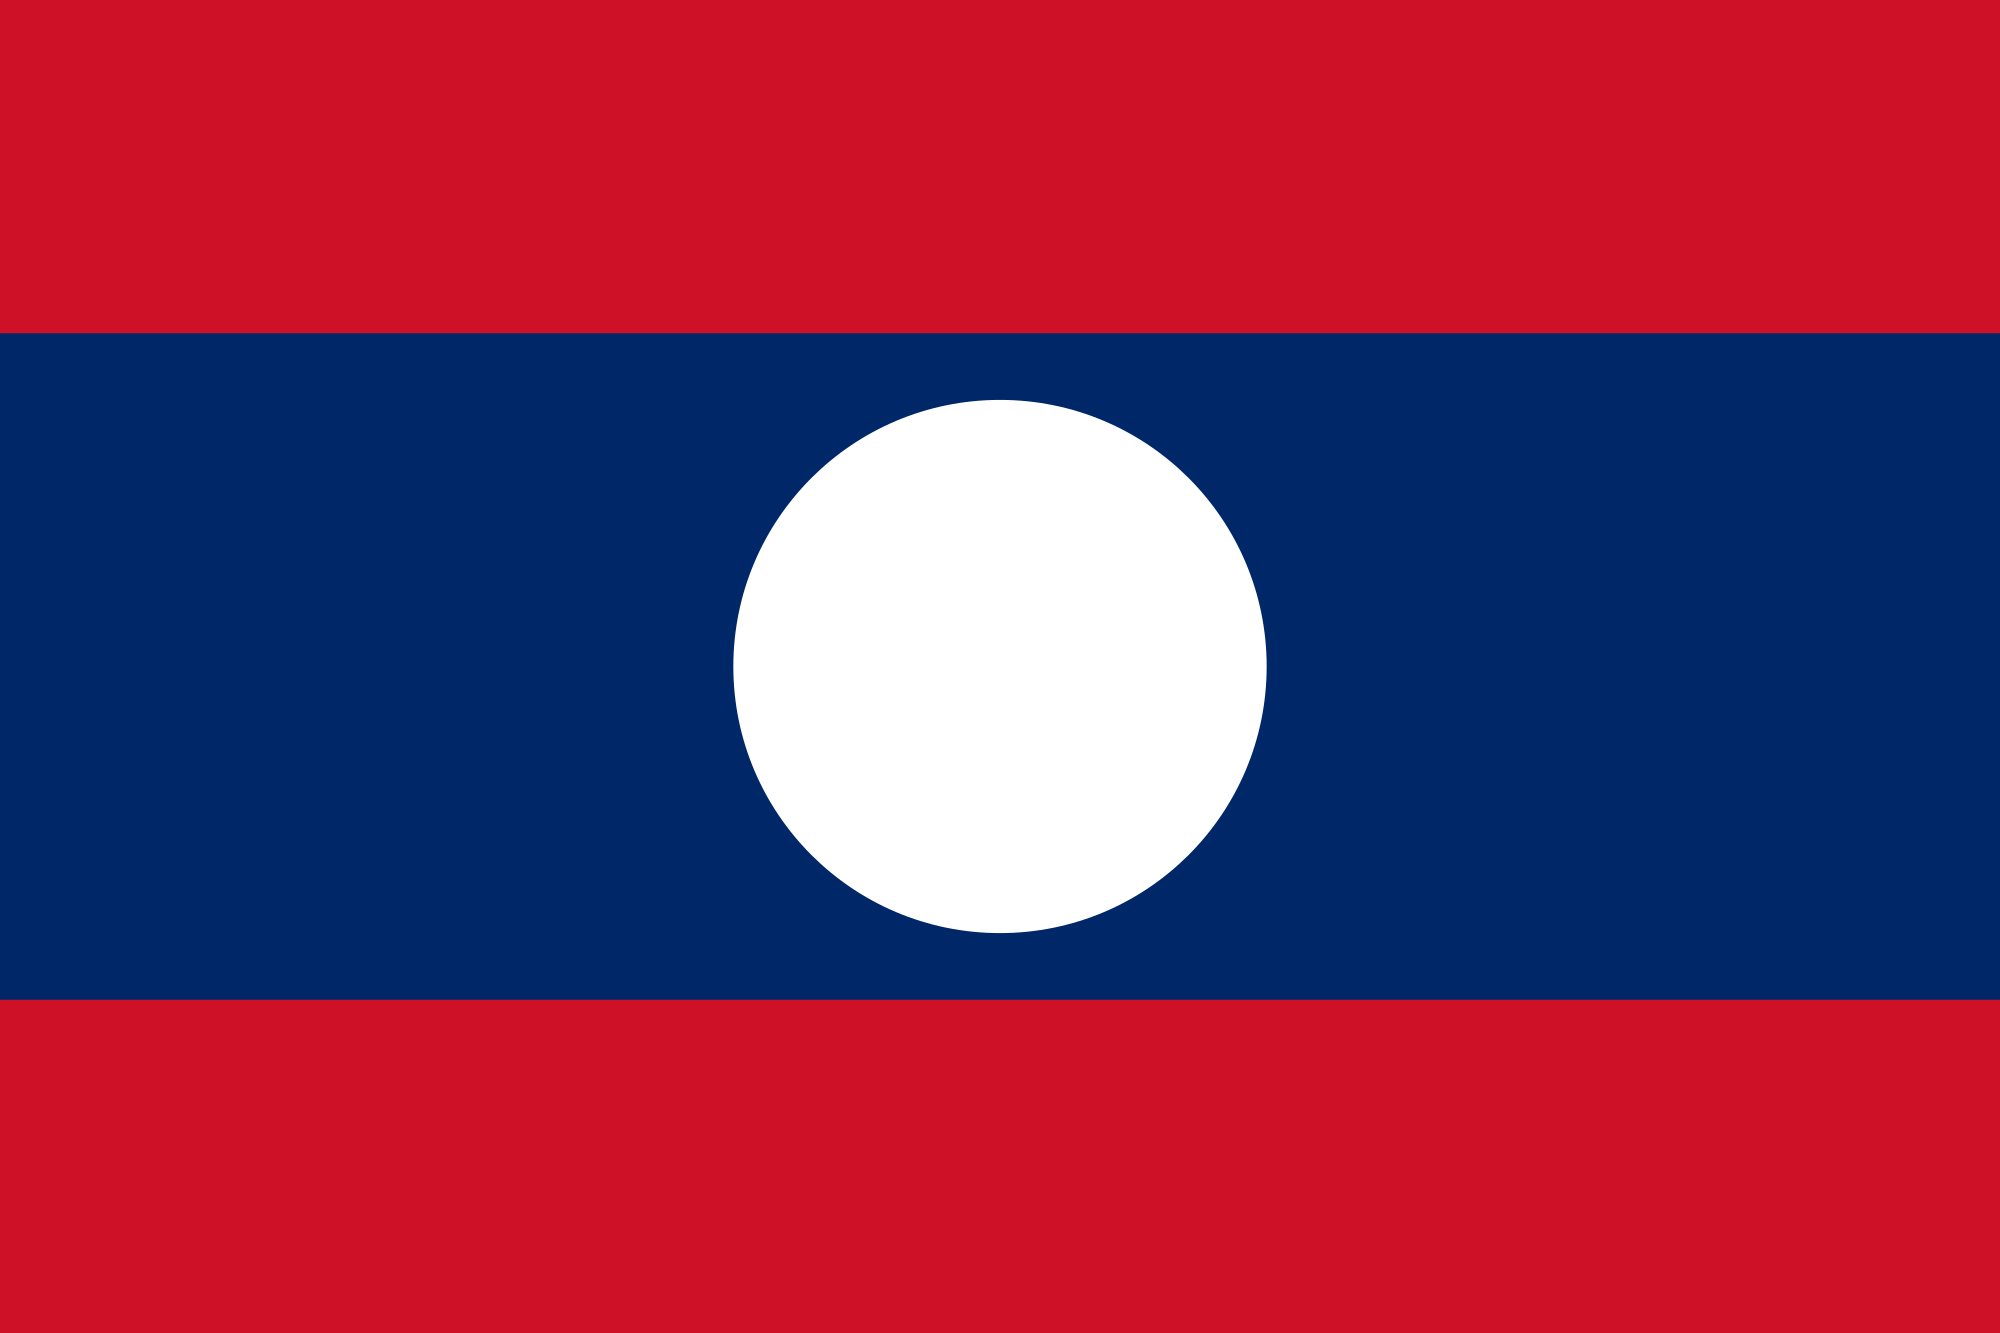 Laos published a Notification to ban mercury containing products for healthcare purpose